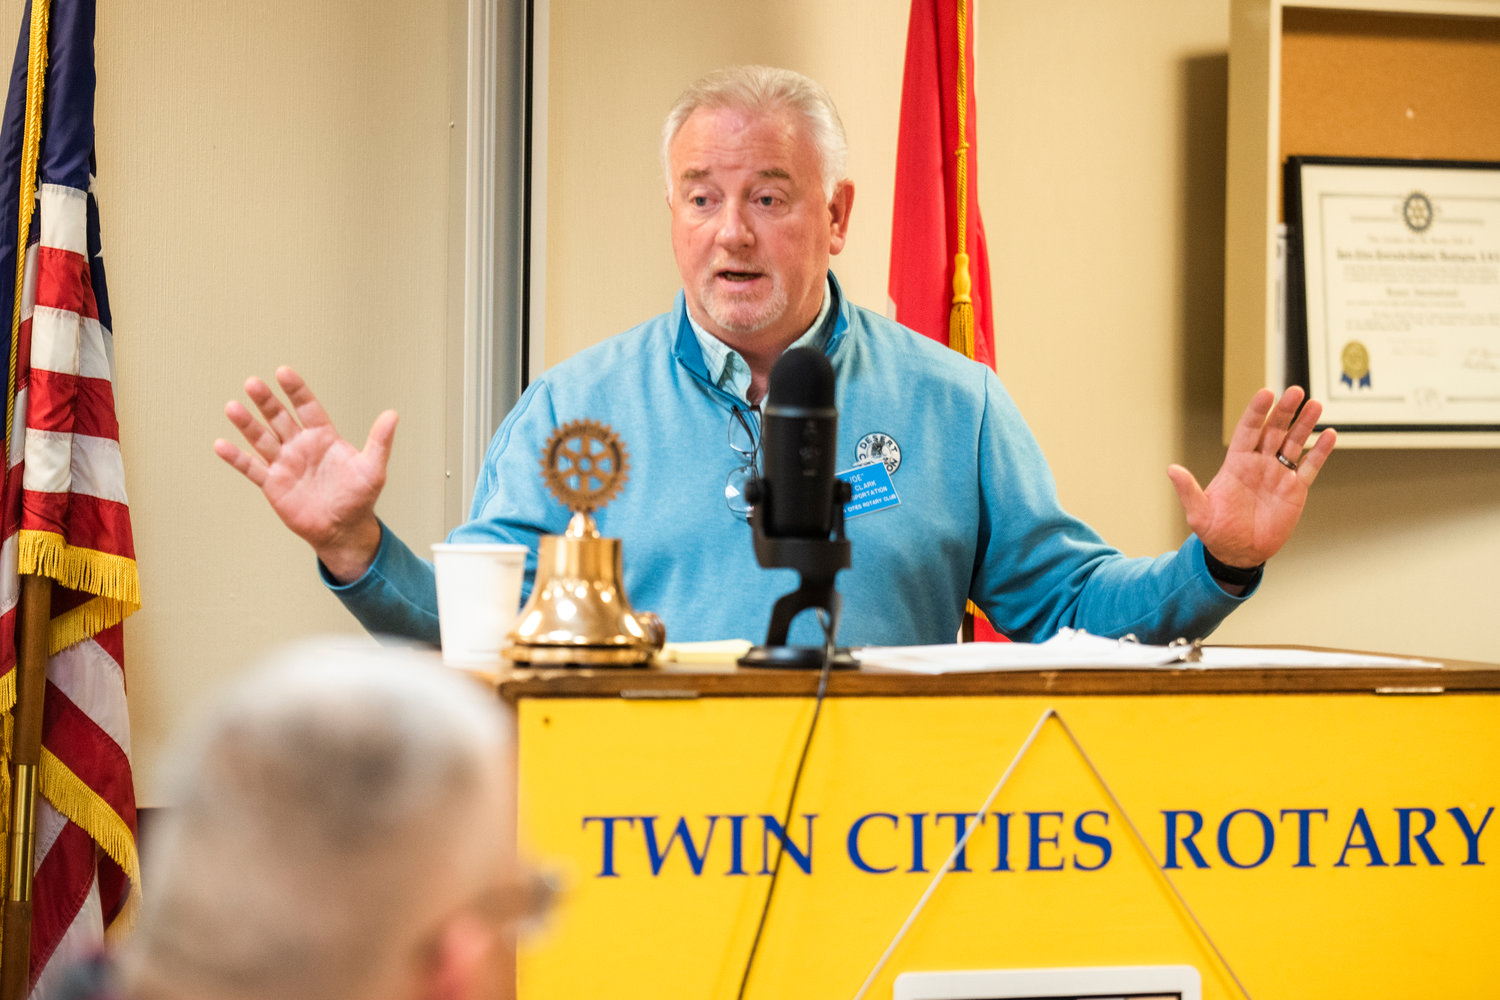 Twin Cities Rotary Club President Joe Clark speaks at a Friday morning club meeting in Chehalis.